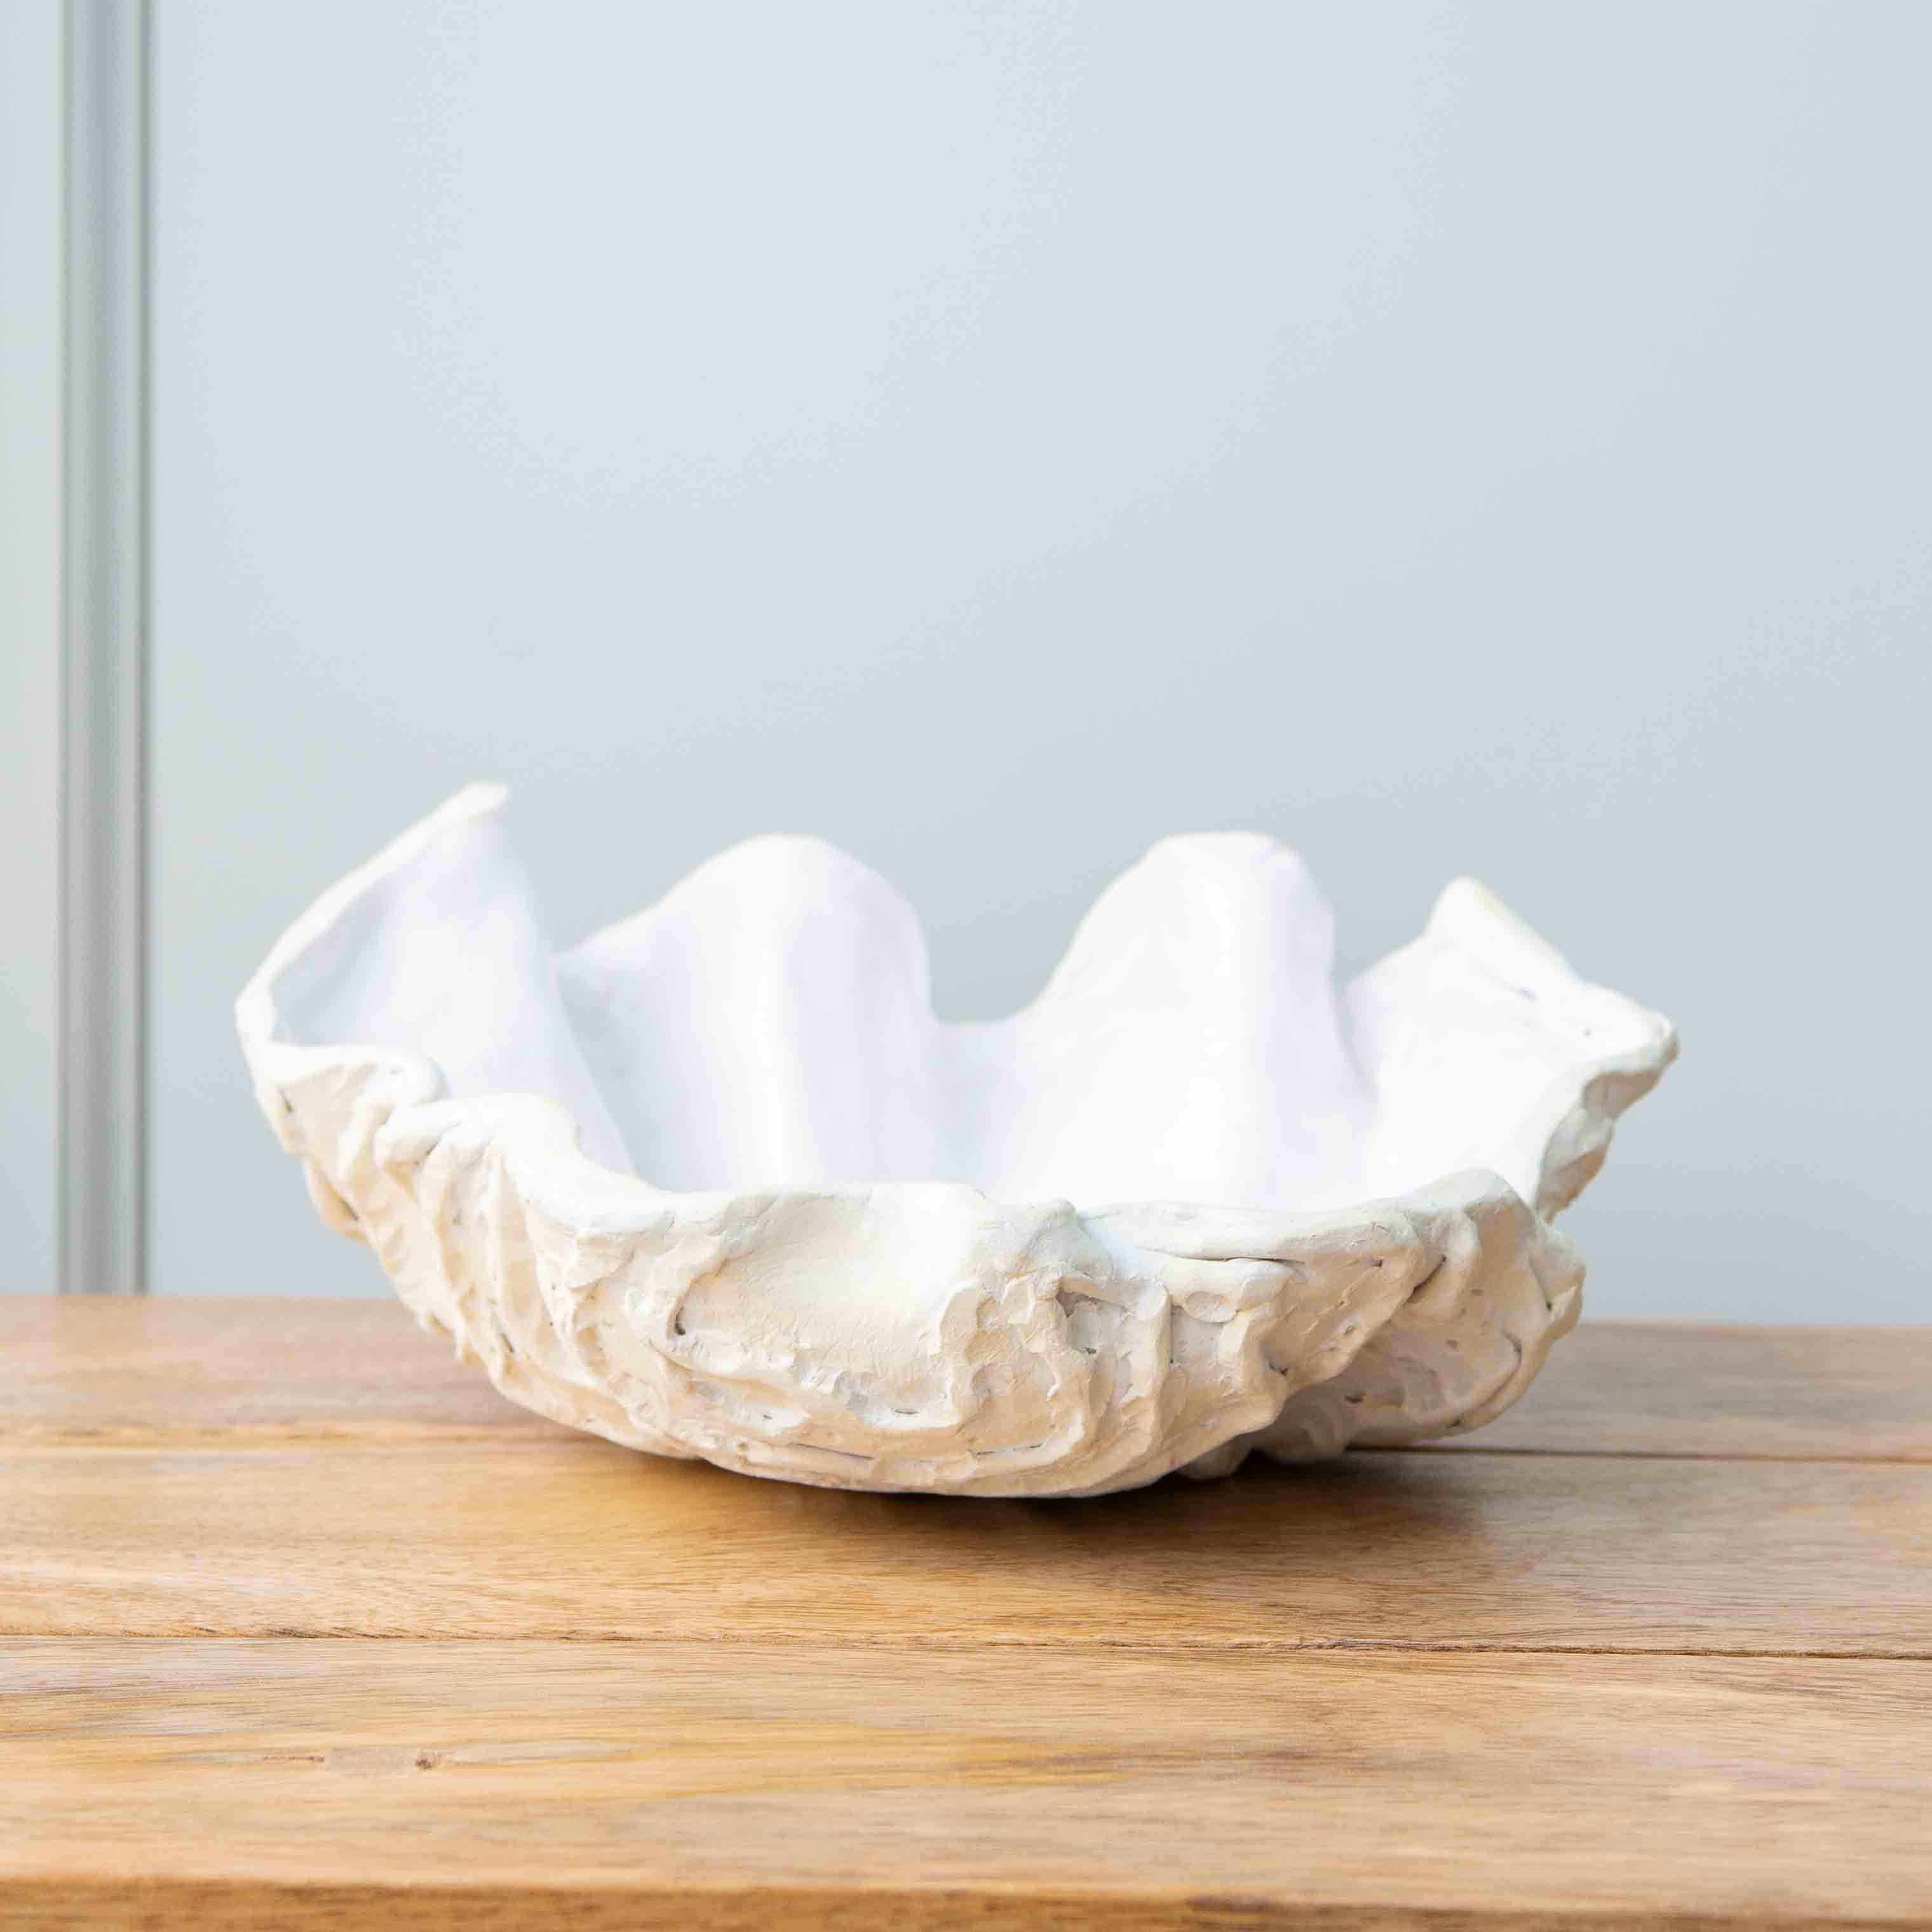 Sculpd Home Kit: Clam Shell Centrepiece Kit